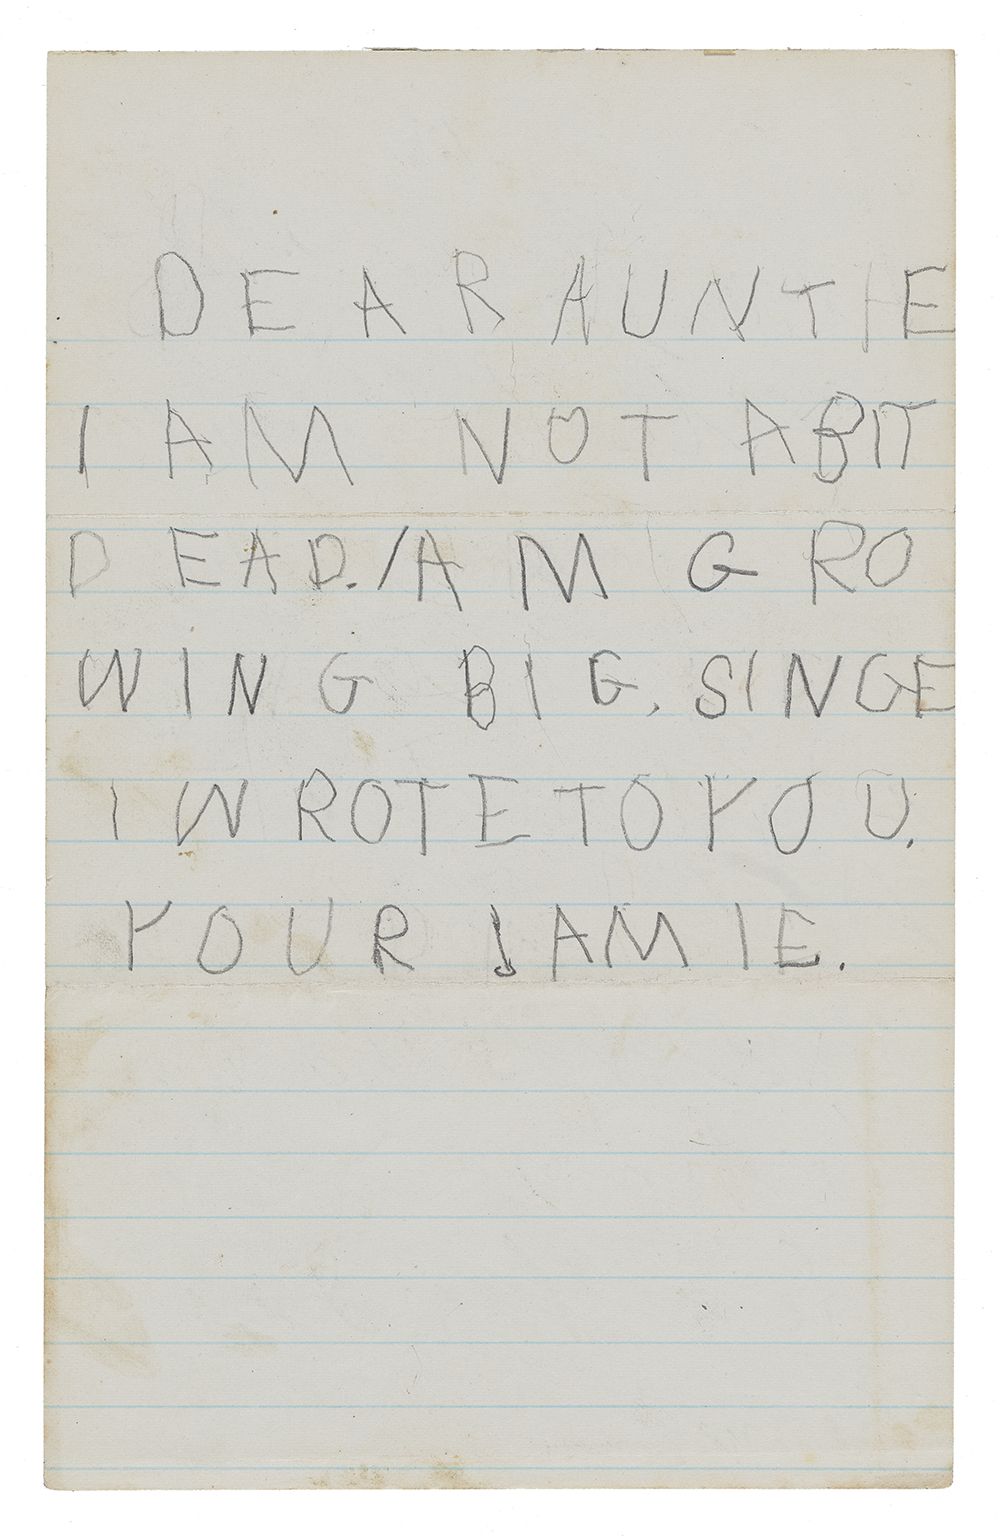 Letter written in pencil and capital letters by a child on blue-lined paper.